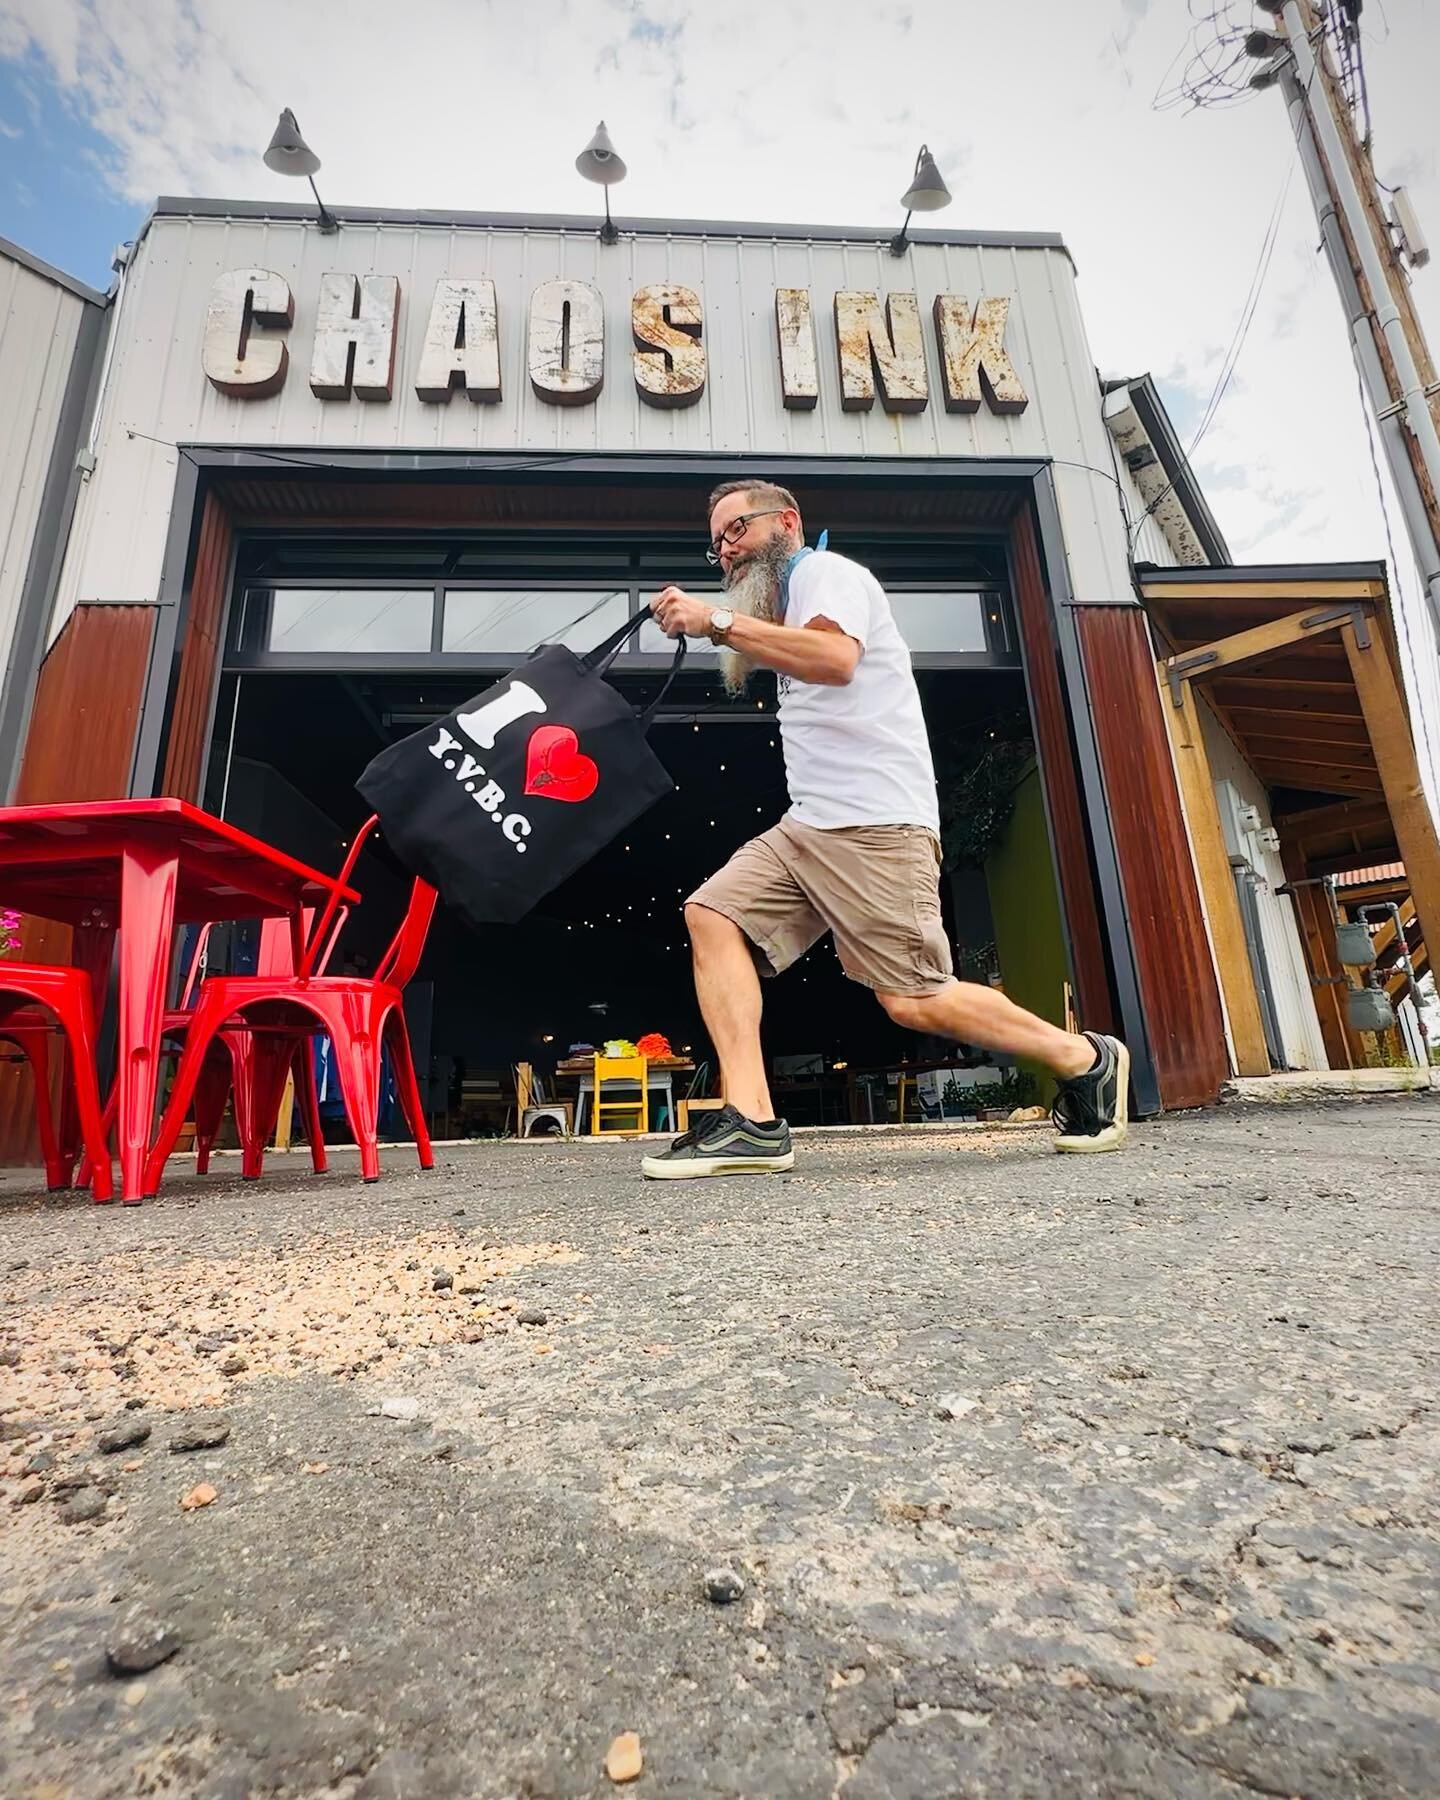 Totes!! Need groceries, beer, somewhere to stash your portable turntable while you bike to your next gig? You need a heavy cotton canvas tote, expertly screened right here at Chaos HQ. This tote is so rugged it&rsquo;ll live longer than you will!
.
B